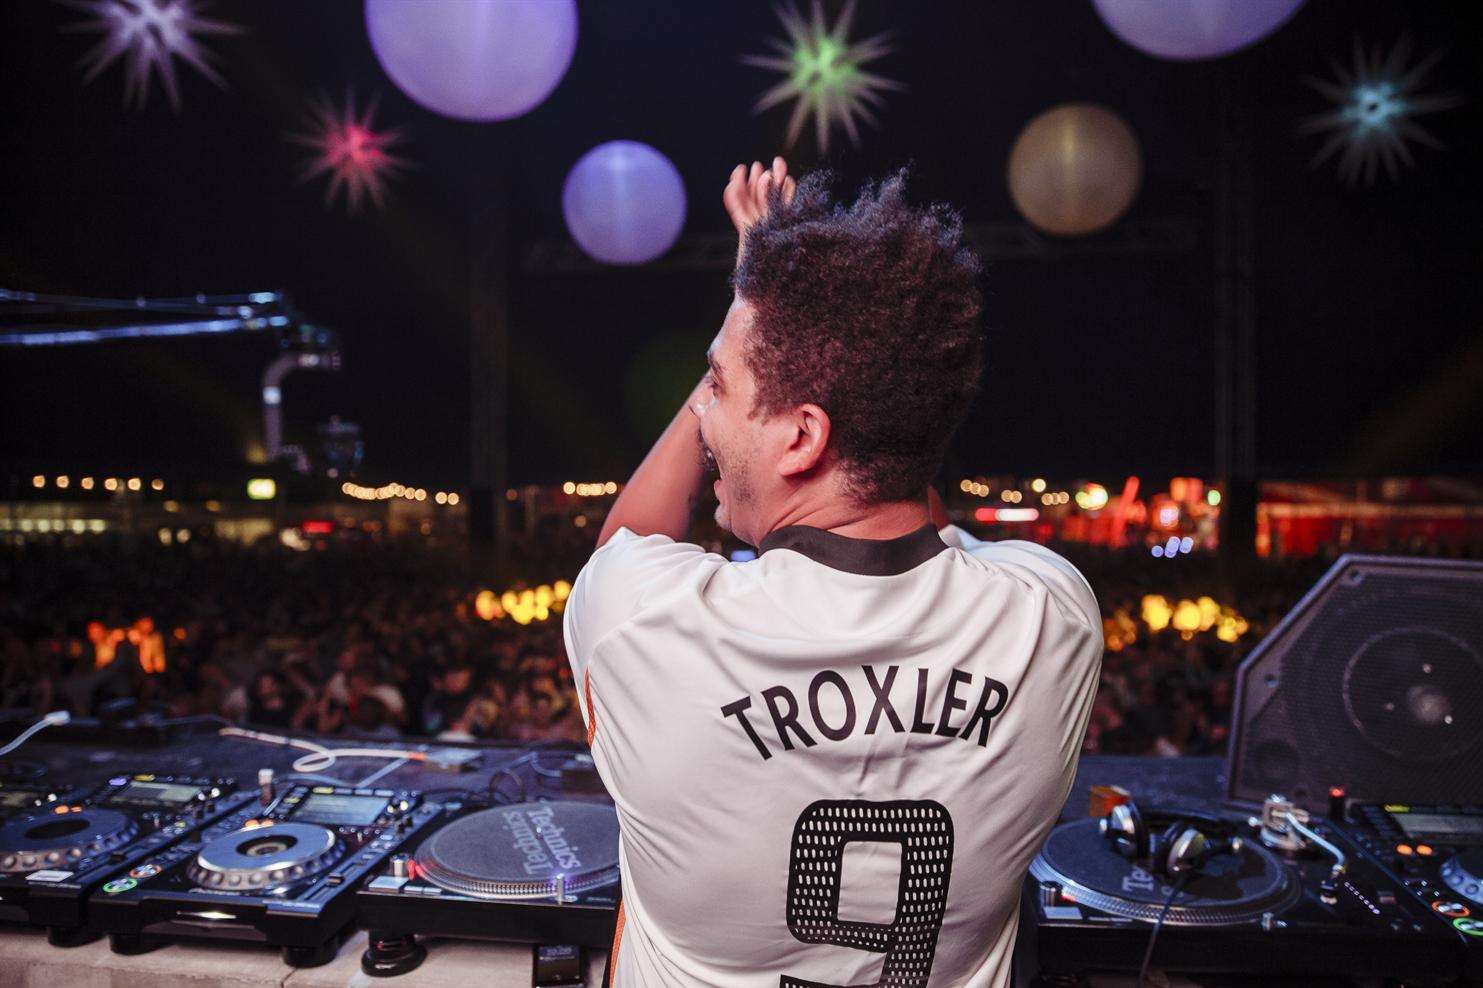 DJ Seth Troxler wore his personalised Maidstone United shirt on stage. Picture by Tony TK Smith.